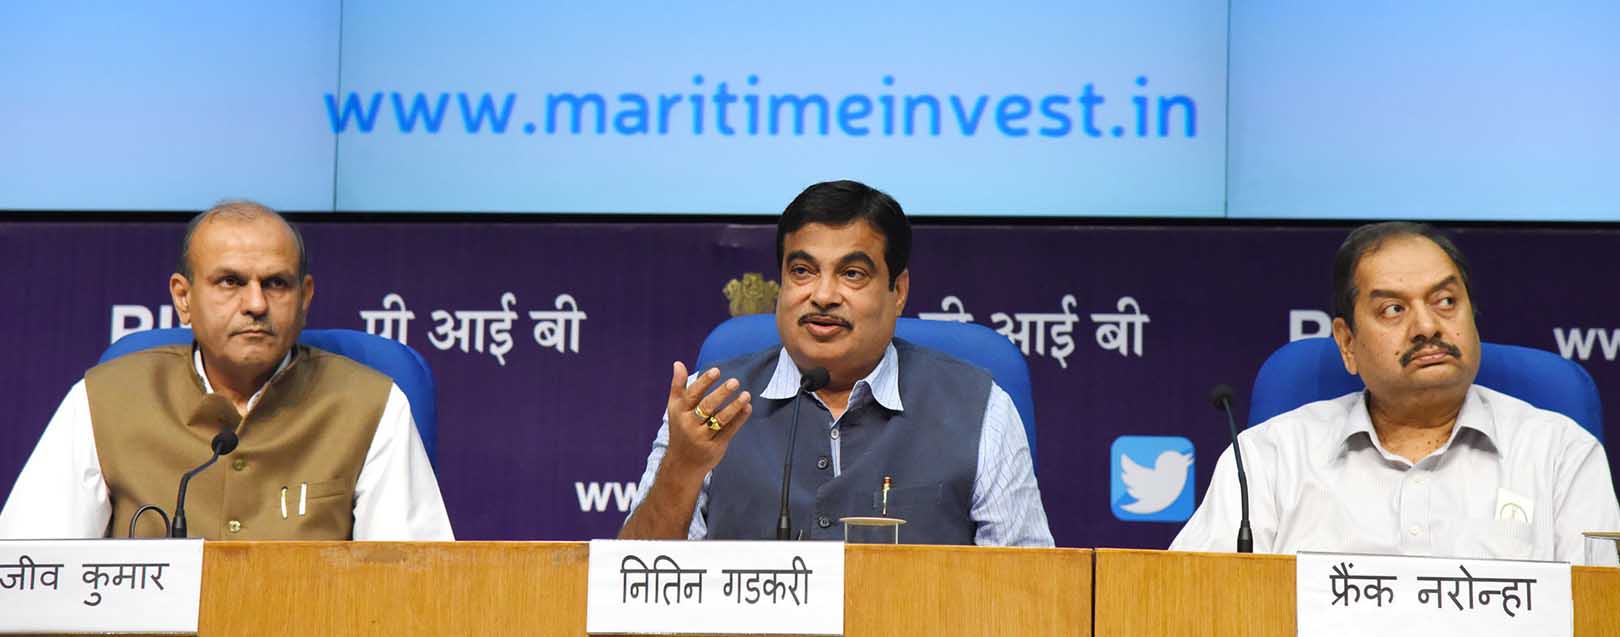 Projects worth Rs.1.2 cr to woo investors at Maritime India Summit